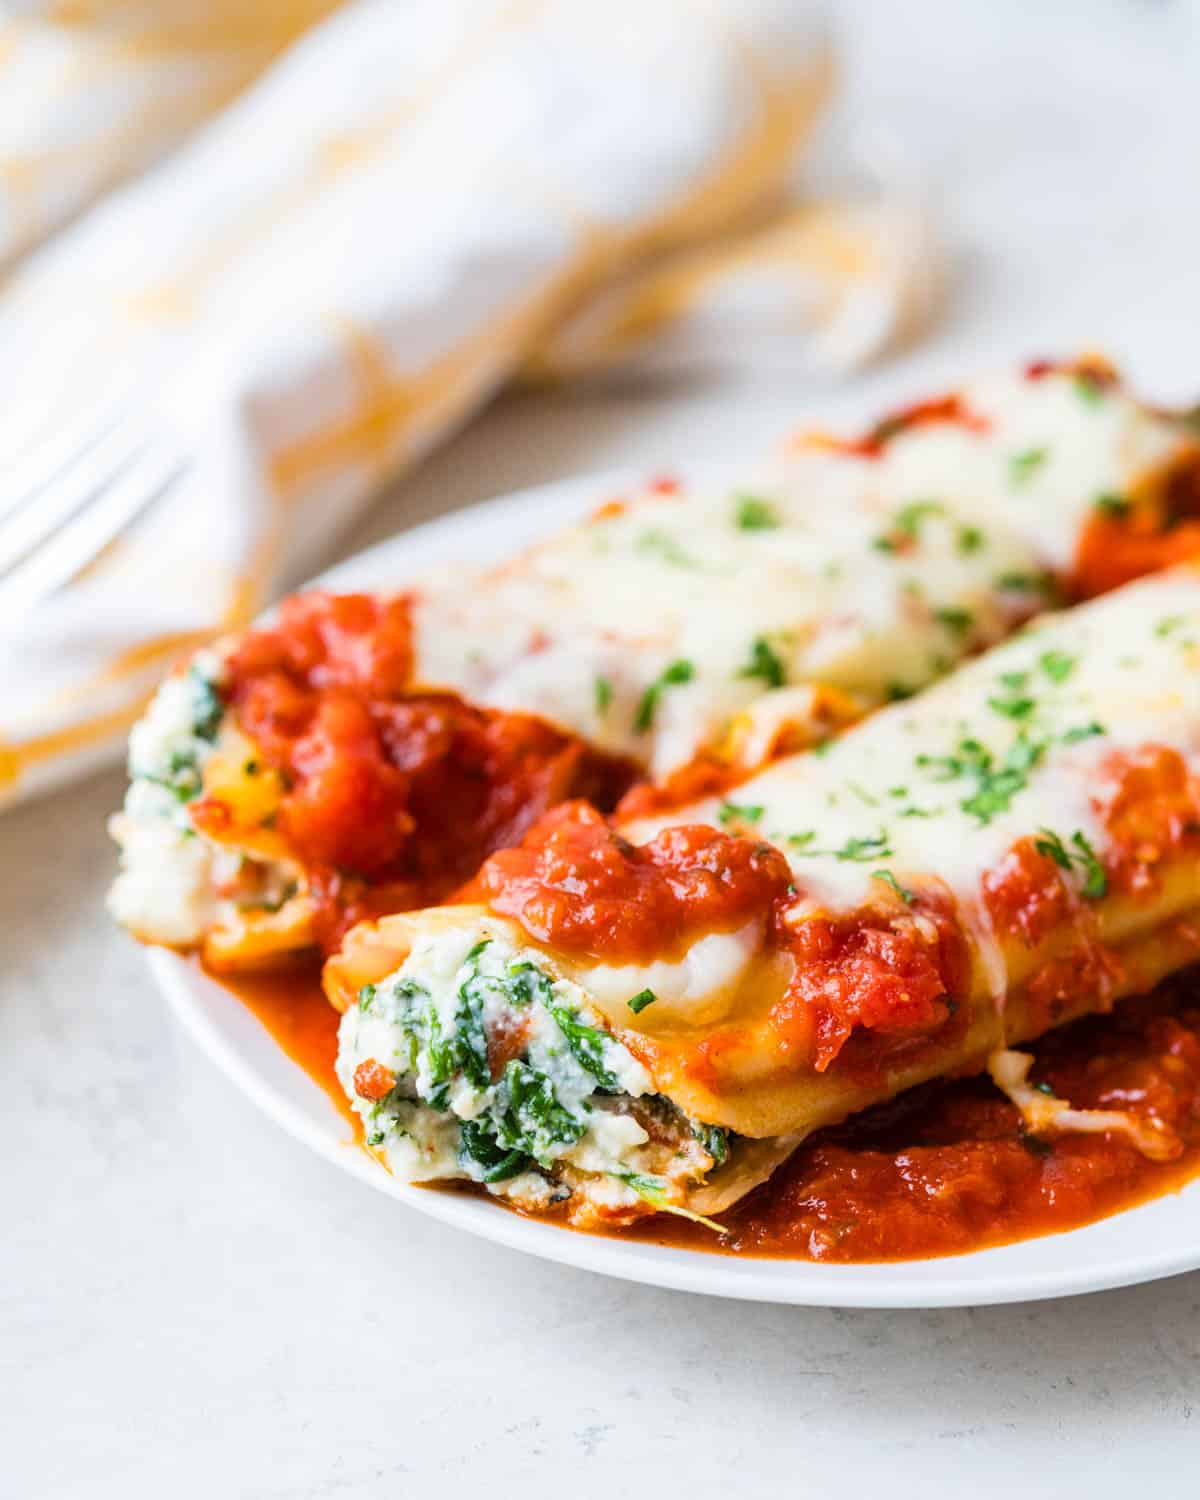 A serving of spinach stuffed manicotti on a white plate.